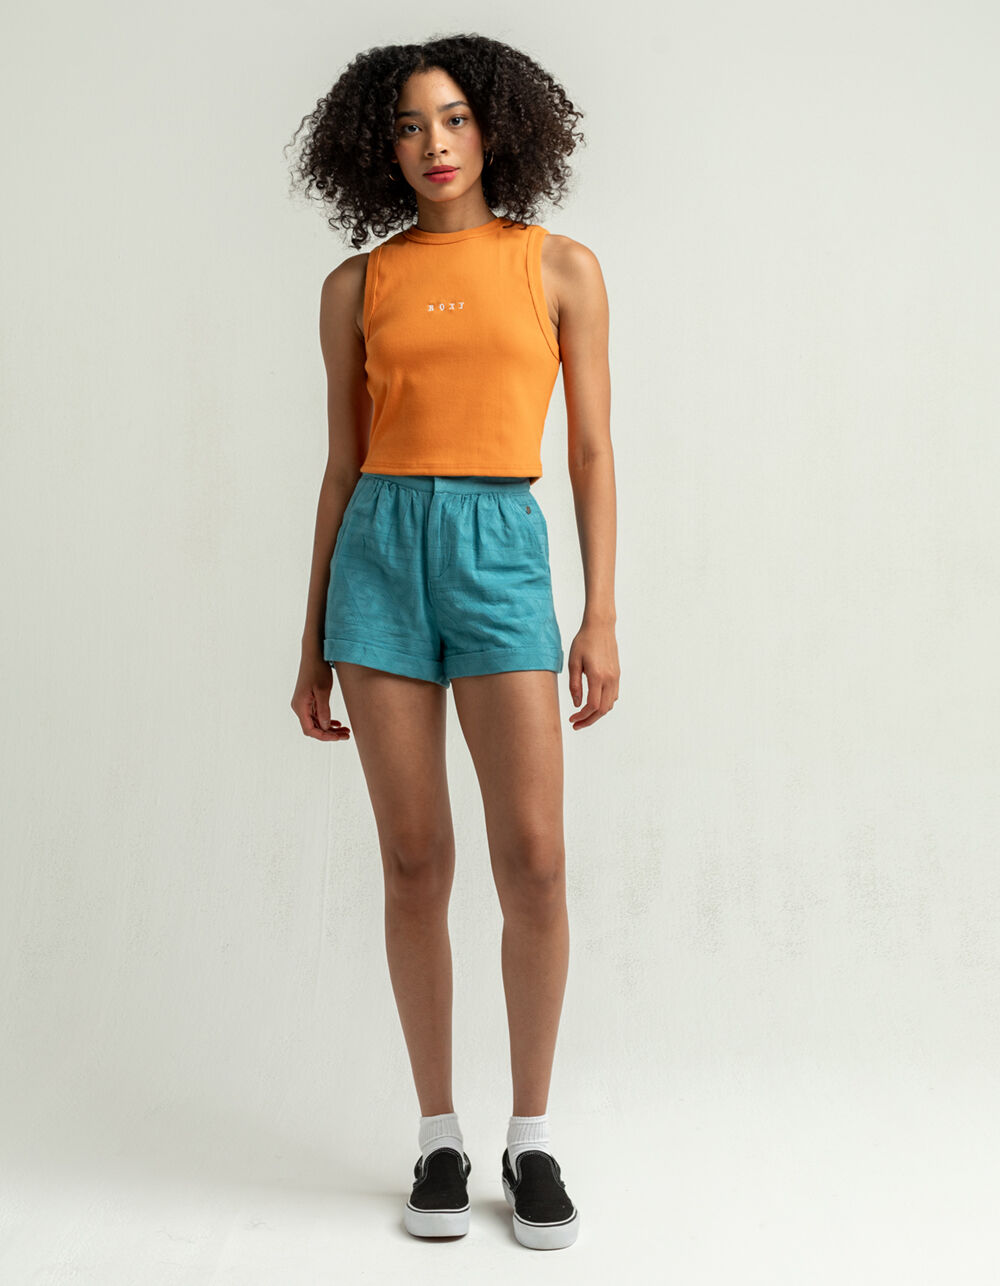 ROXY All I See Womens Shorts - BLUE | Tillys